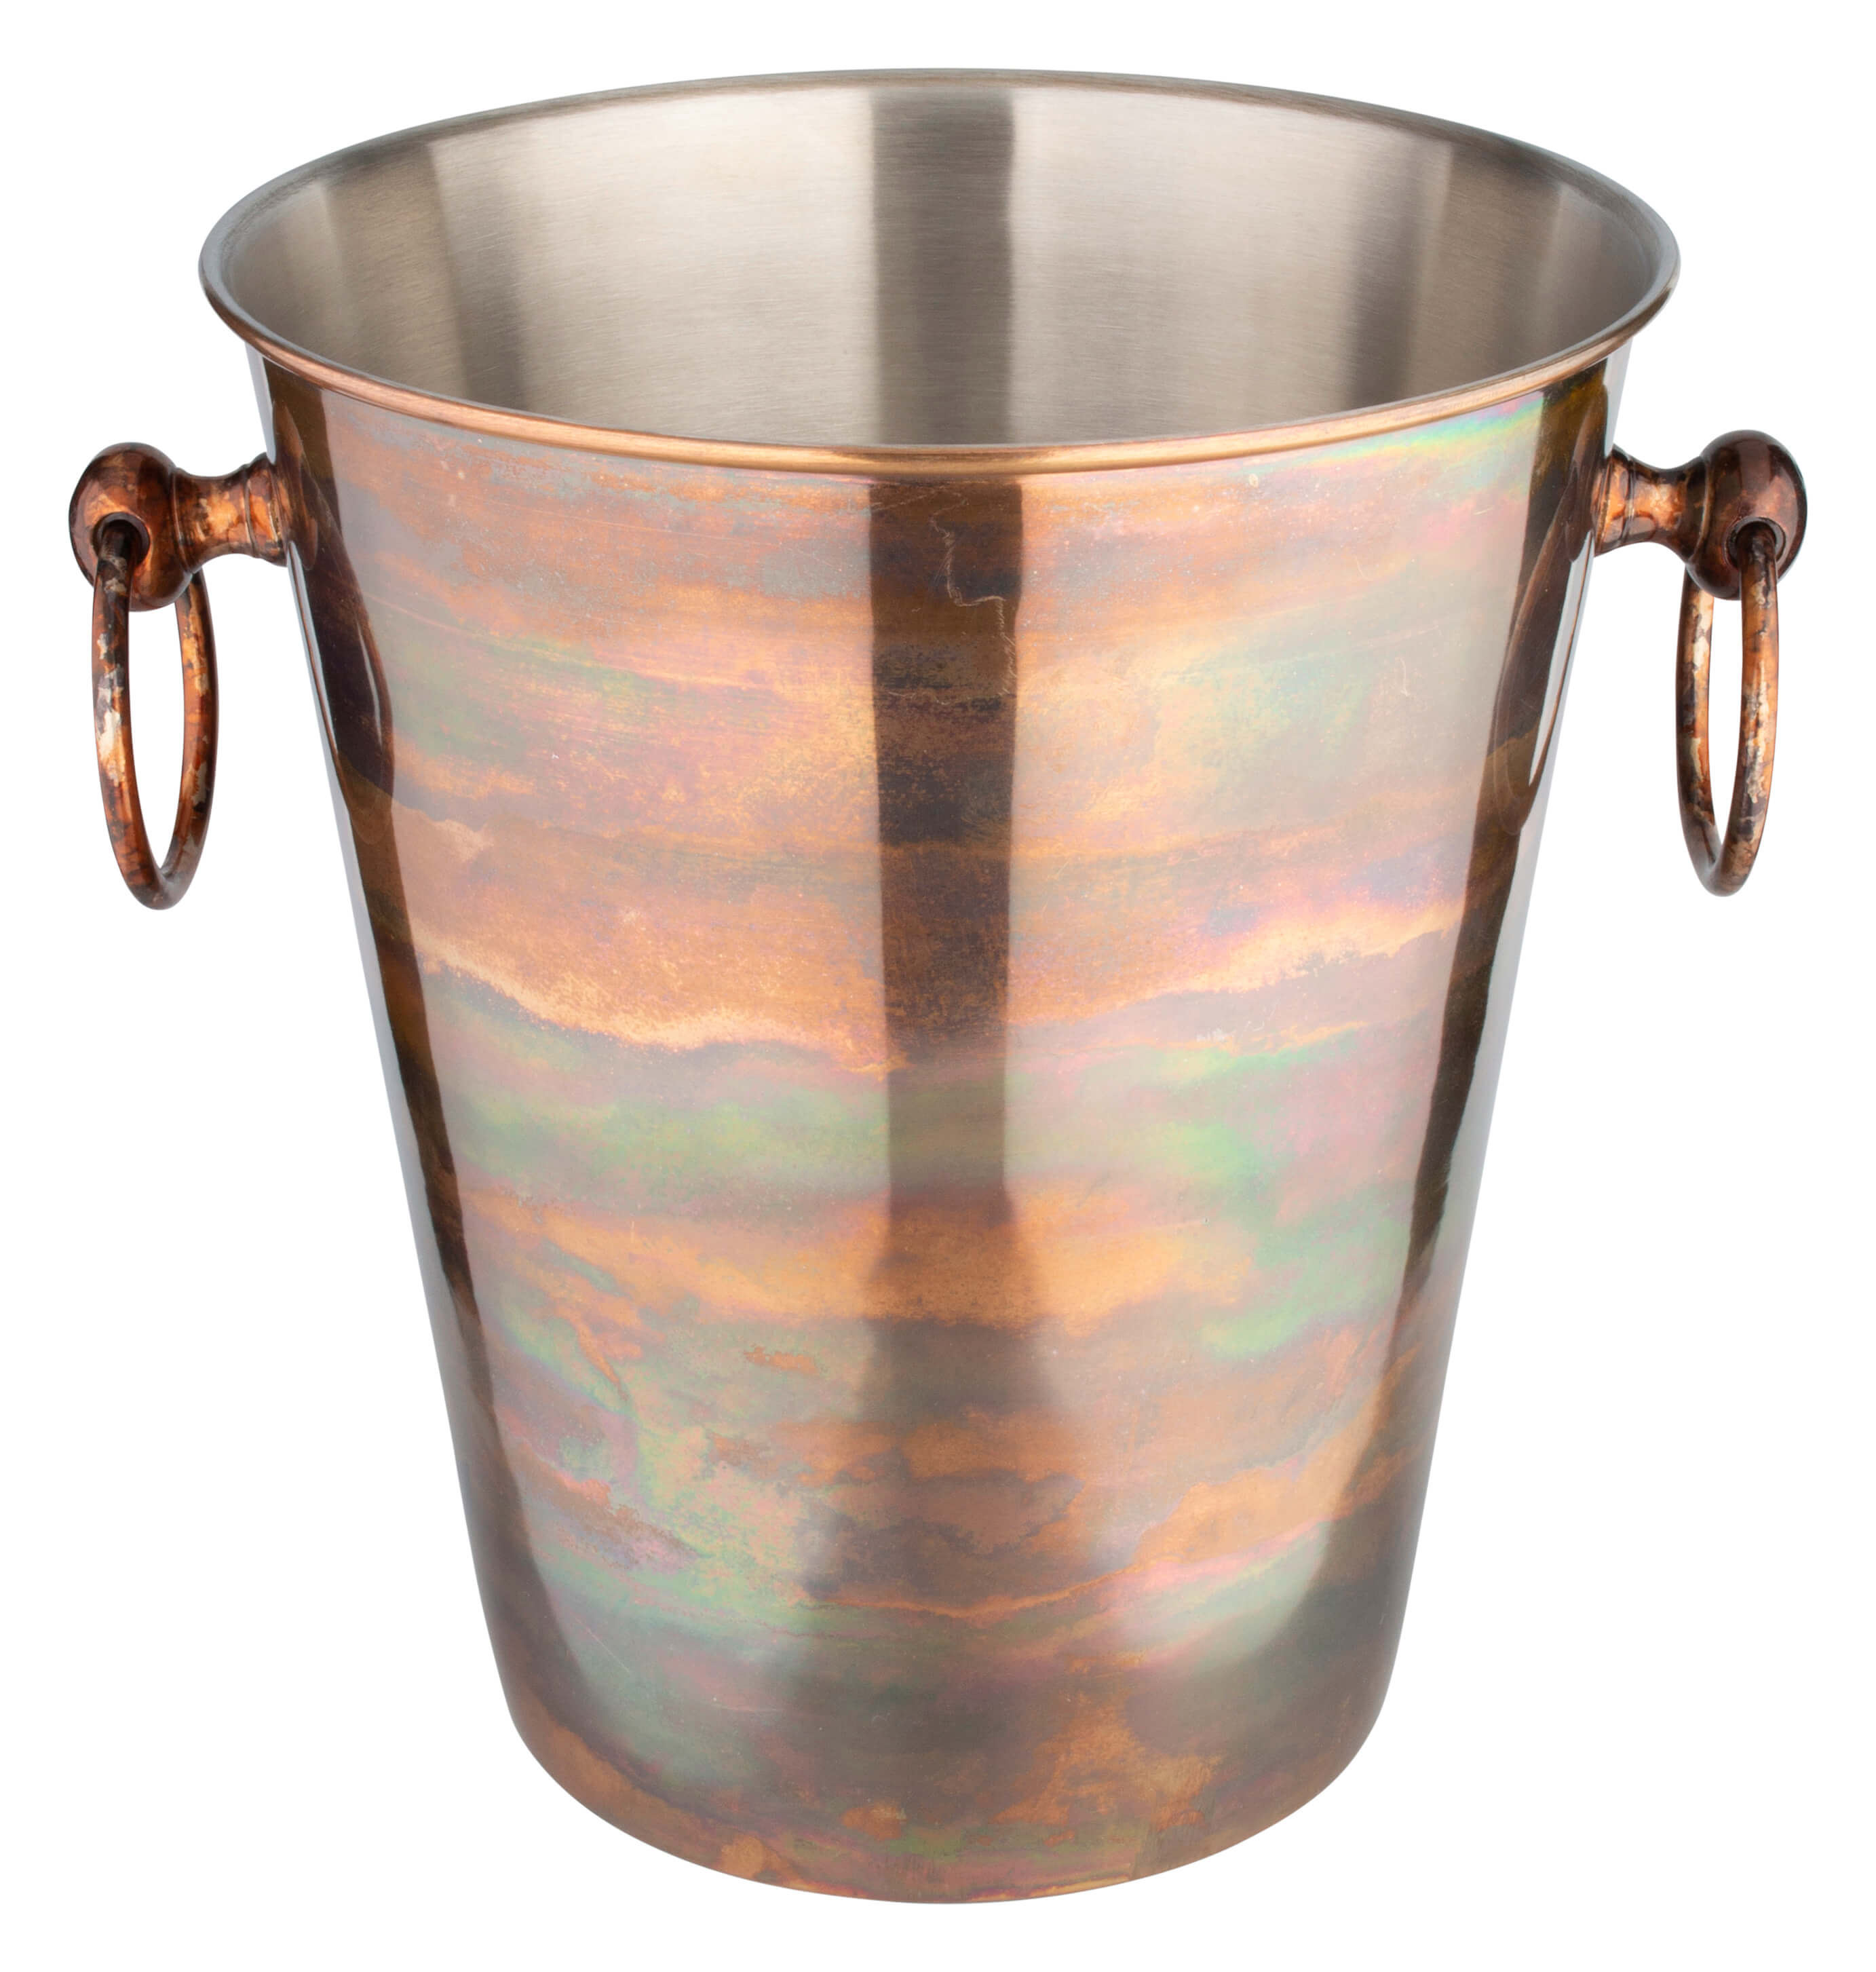 Champagne bucket, stainless steel, copper vintage look - 20cm